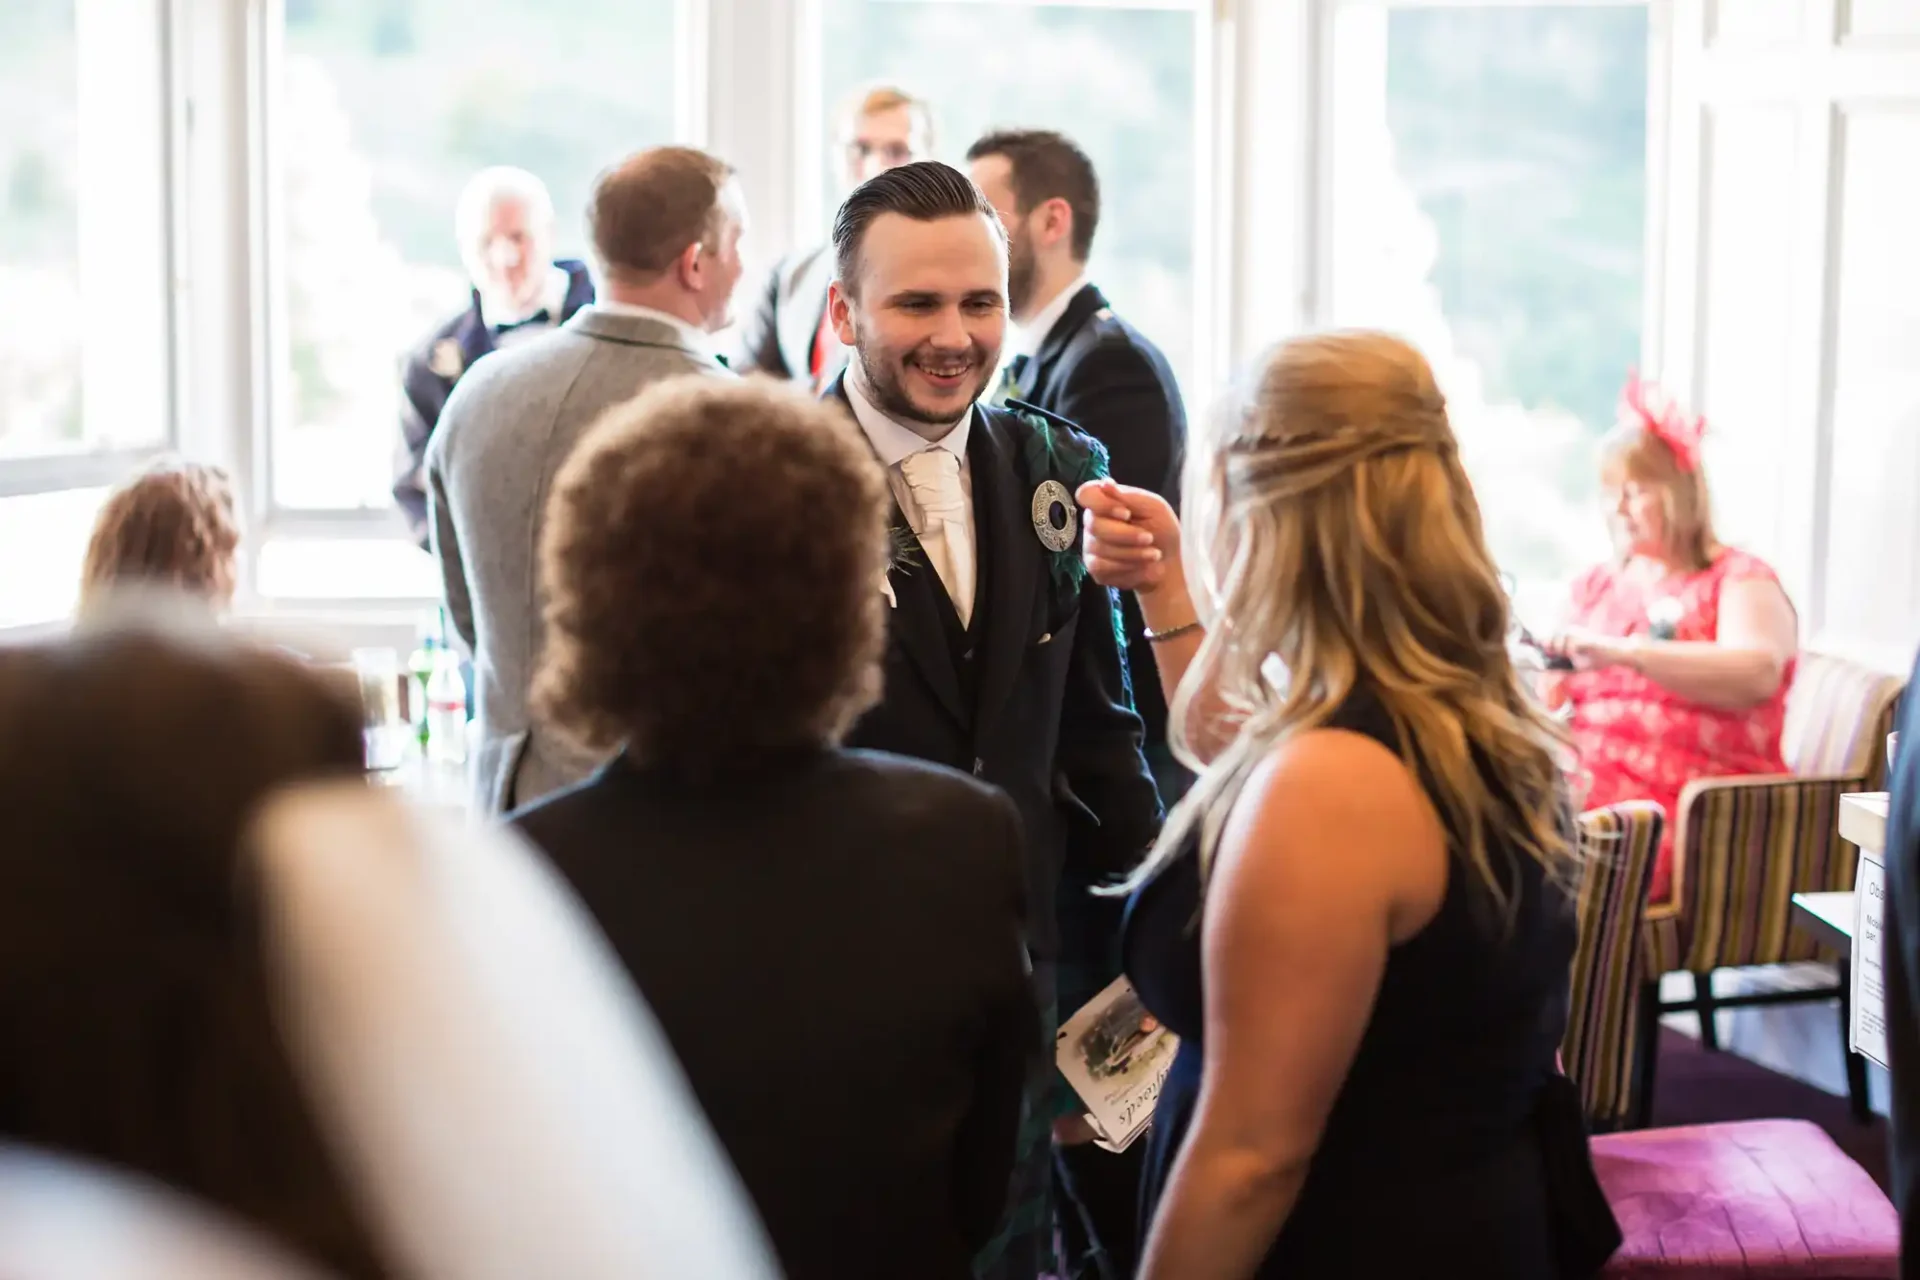 A man in a suit with a boutonniere smiles during a conversation at a lively indoor event with guests in the background. .